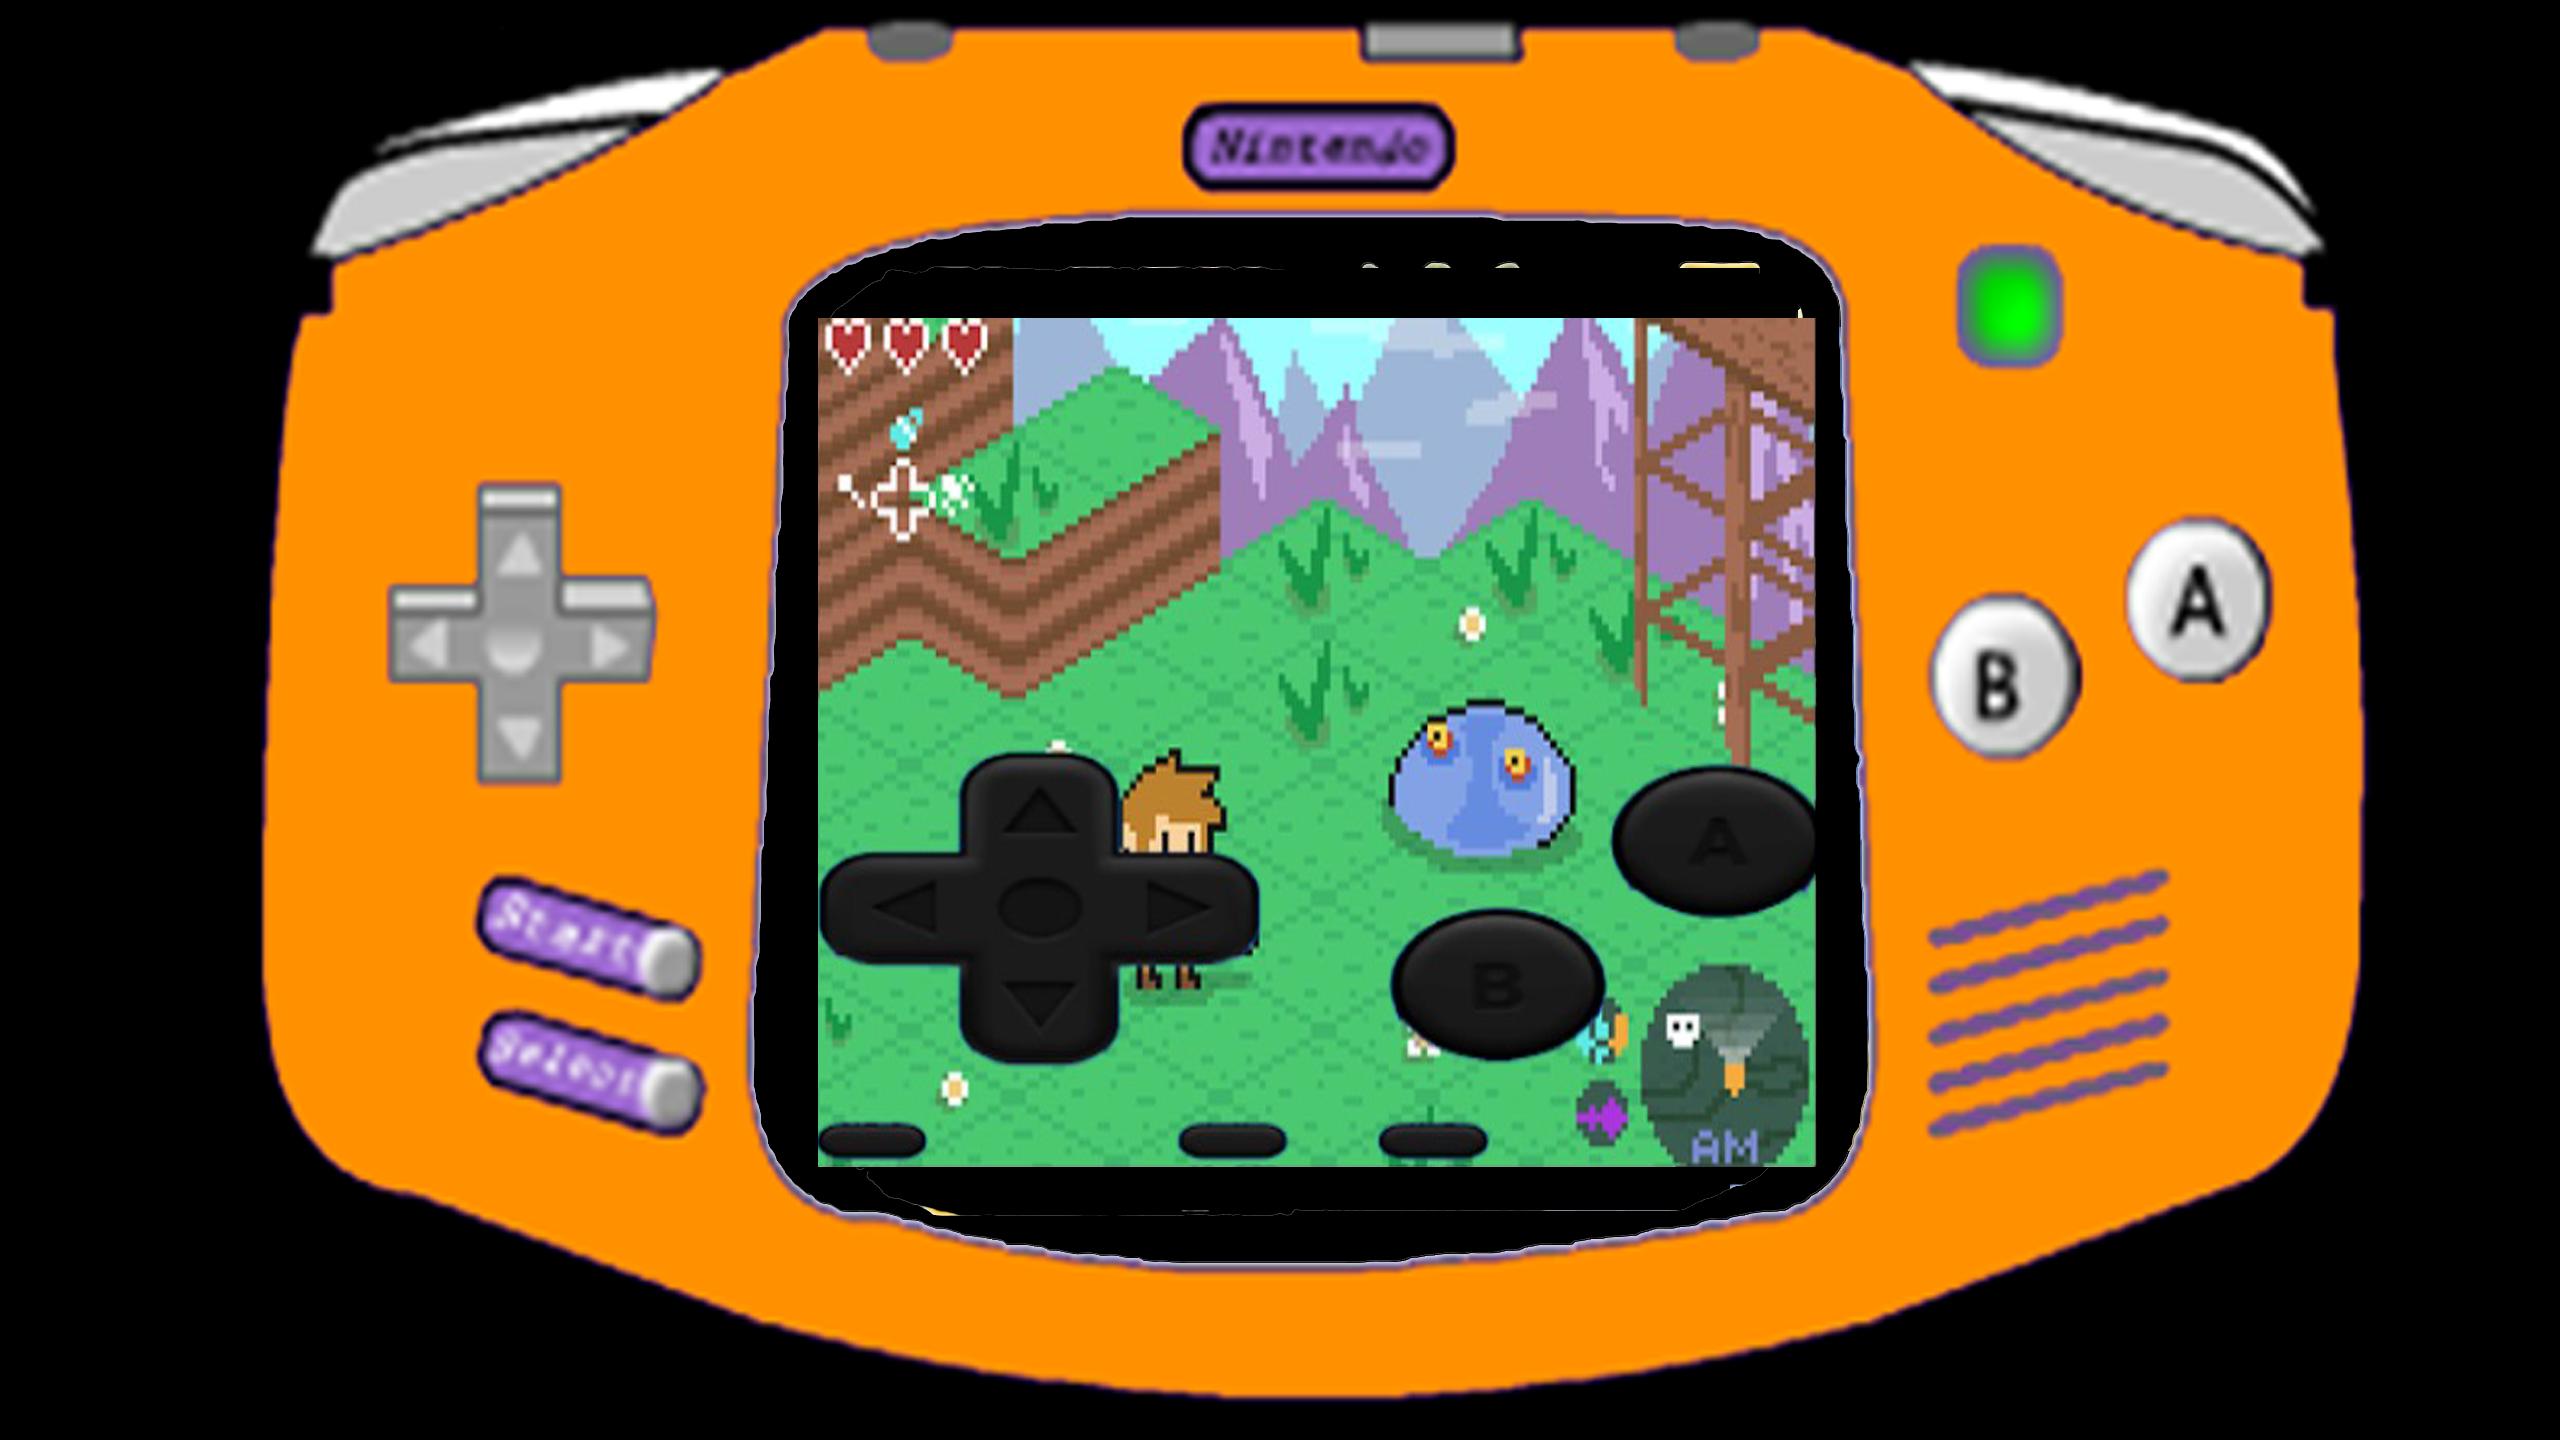 GBA Emulator - All games Free APK voor Android Download